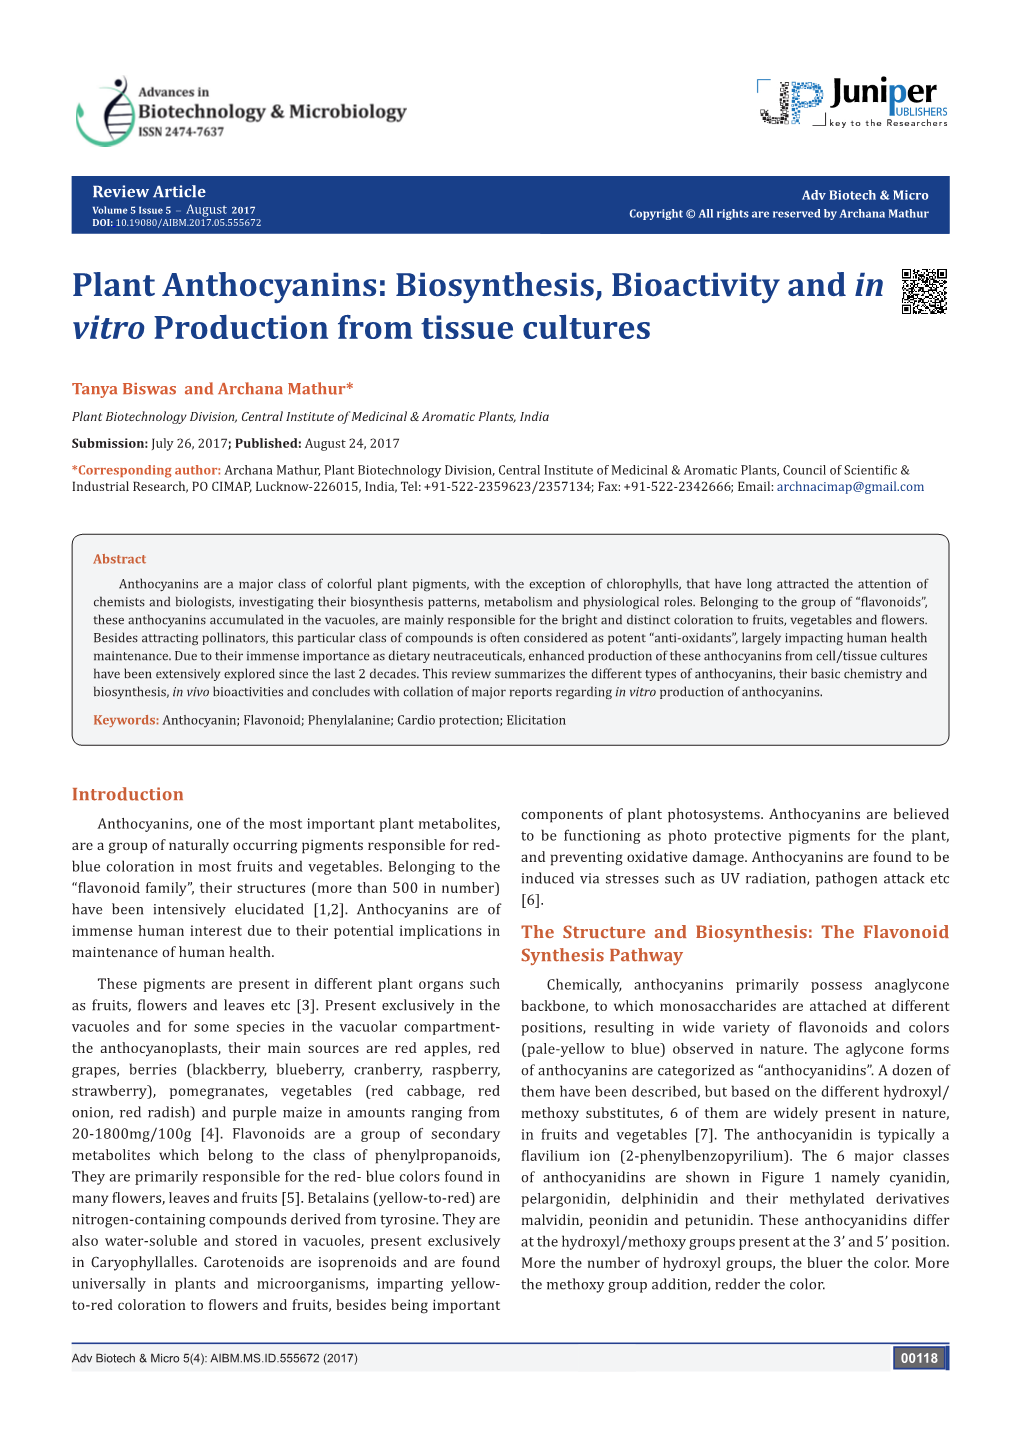 Plant Anthocyanins: Biosynthesis, Bioactivity and in Vitro Production from Tissue Cultures